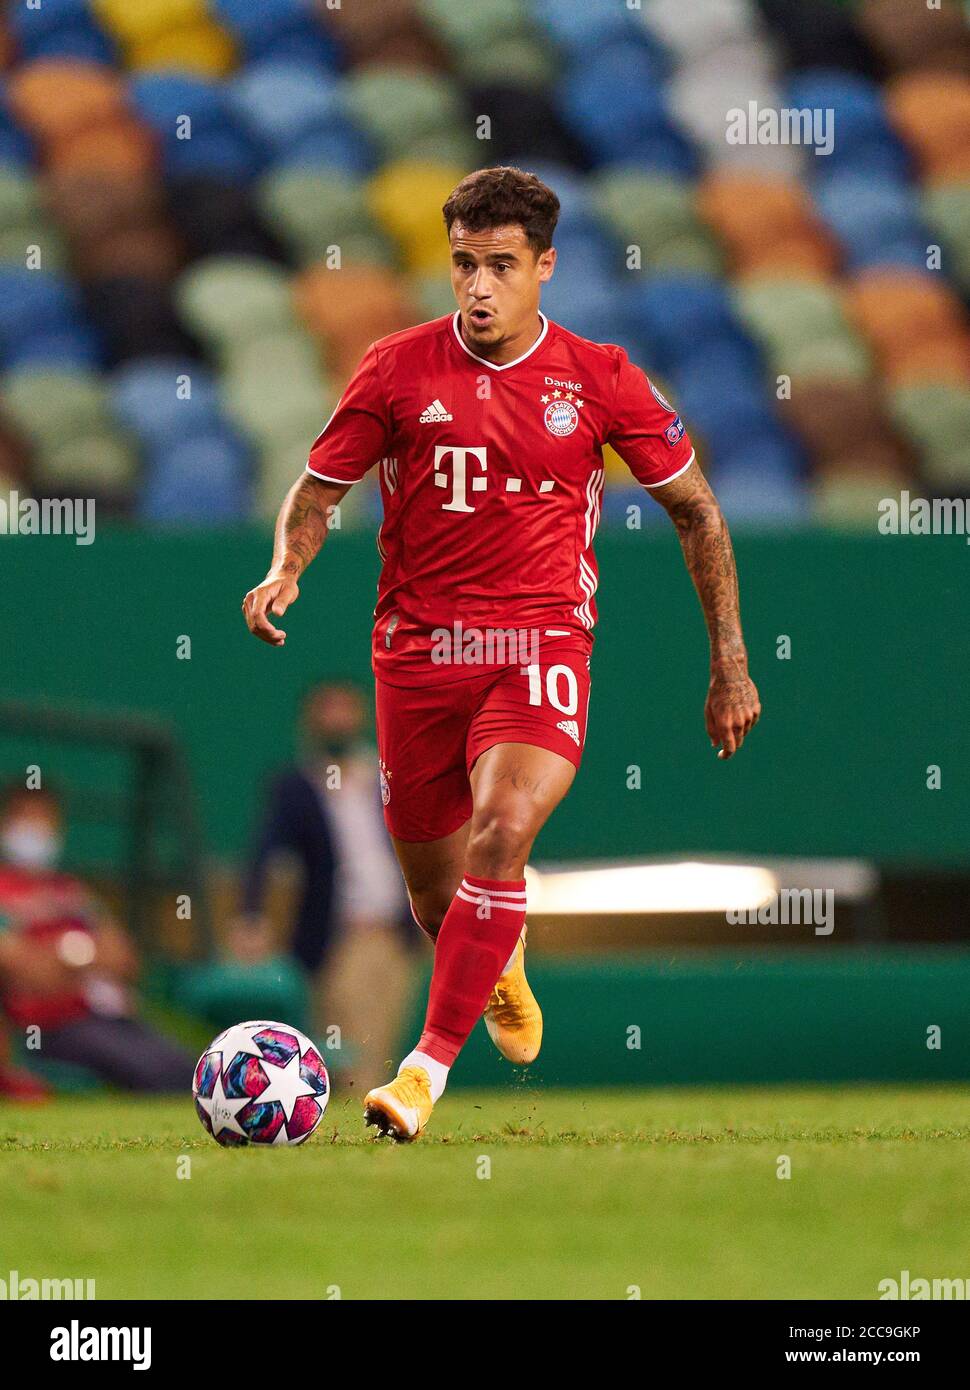 Lisbon, Lissabon, Portugal, 19th August 2020.  Philippe COUTINHO, FCB 10   in the semifinal match UEFA Champions League, final tournament FC BAYERN MUENCHEN - OLYMPIQUE LYON 3-0 in season 2019/2020, FCB,  © Peter Schatz / Alamy Live News  / Pool   - UEFA REGULATIONS PROHIBIT ANY USE OF PHOTOGRAPHS as IMAGE SEQUENCES and/or QUASI-VIDEO -  National and international News-Agencies OUT Editorial Use ONLY Stock Photo